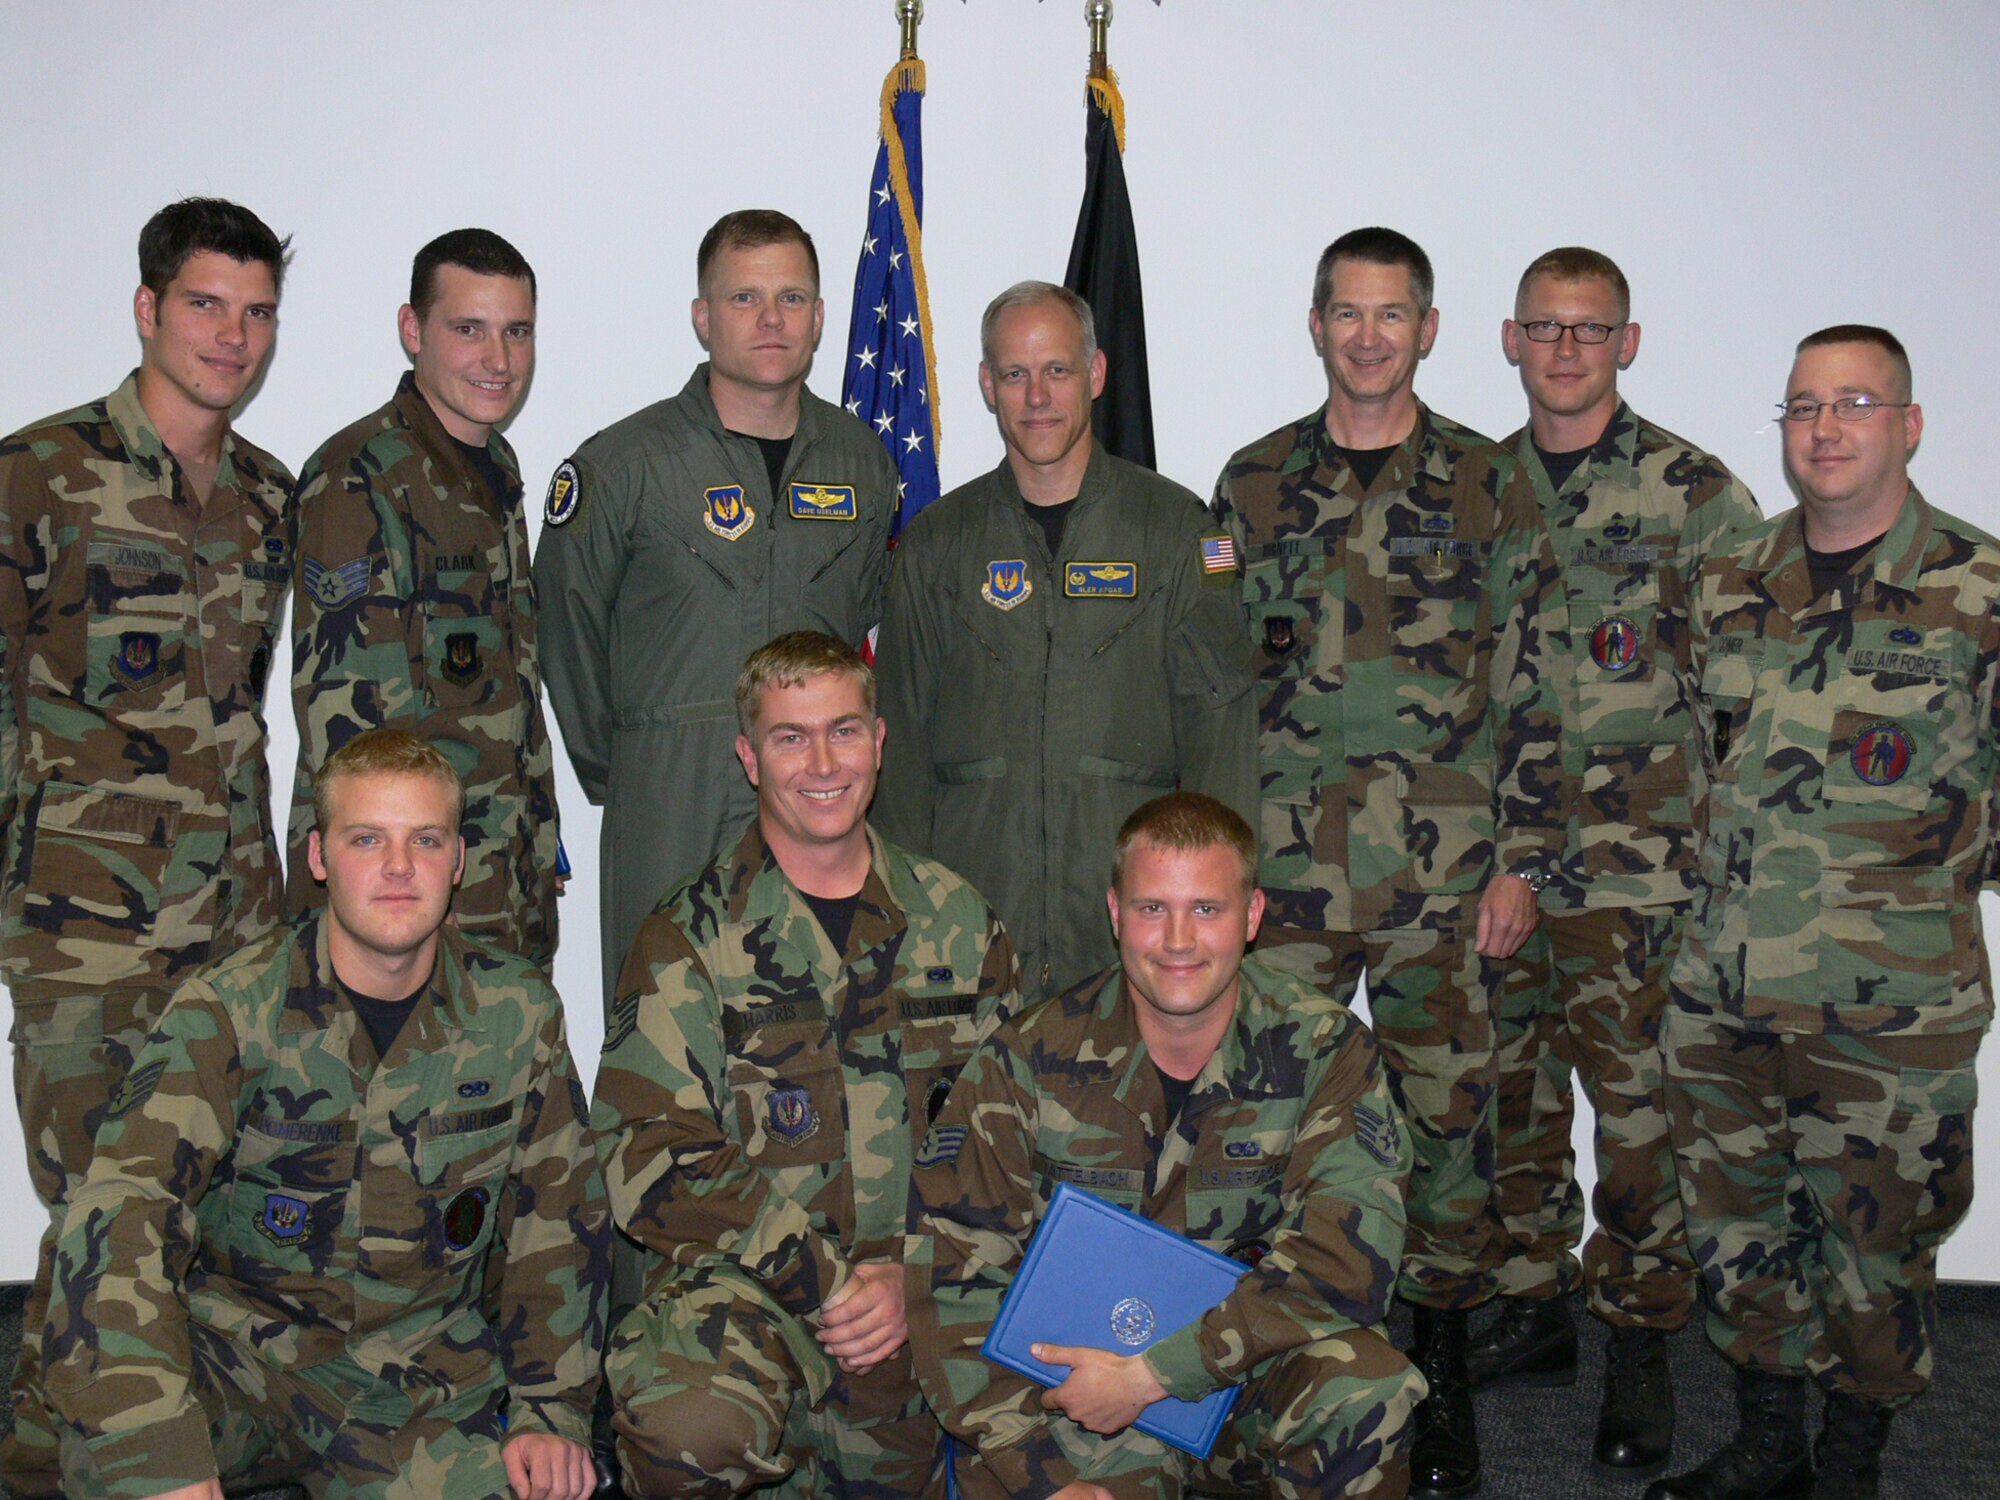 Lt. Col. David Uselman, 86th Operations Group deputy commander (back row, third from left), Col. Glen Apgar, 86th Airlift Wing vice commander (back row, center) and Col. Robert Burnett, 86th Maintenance Group commander (back row, third from right), congratulated seven Dedicated Crew Chiefs from the 86th Aircraft Maintenance Squadron after the DCC’s took their oath. Photo by Monica Mendoza.